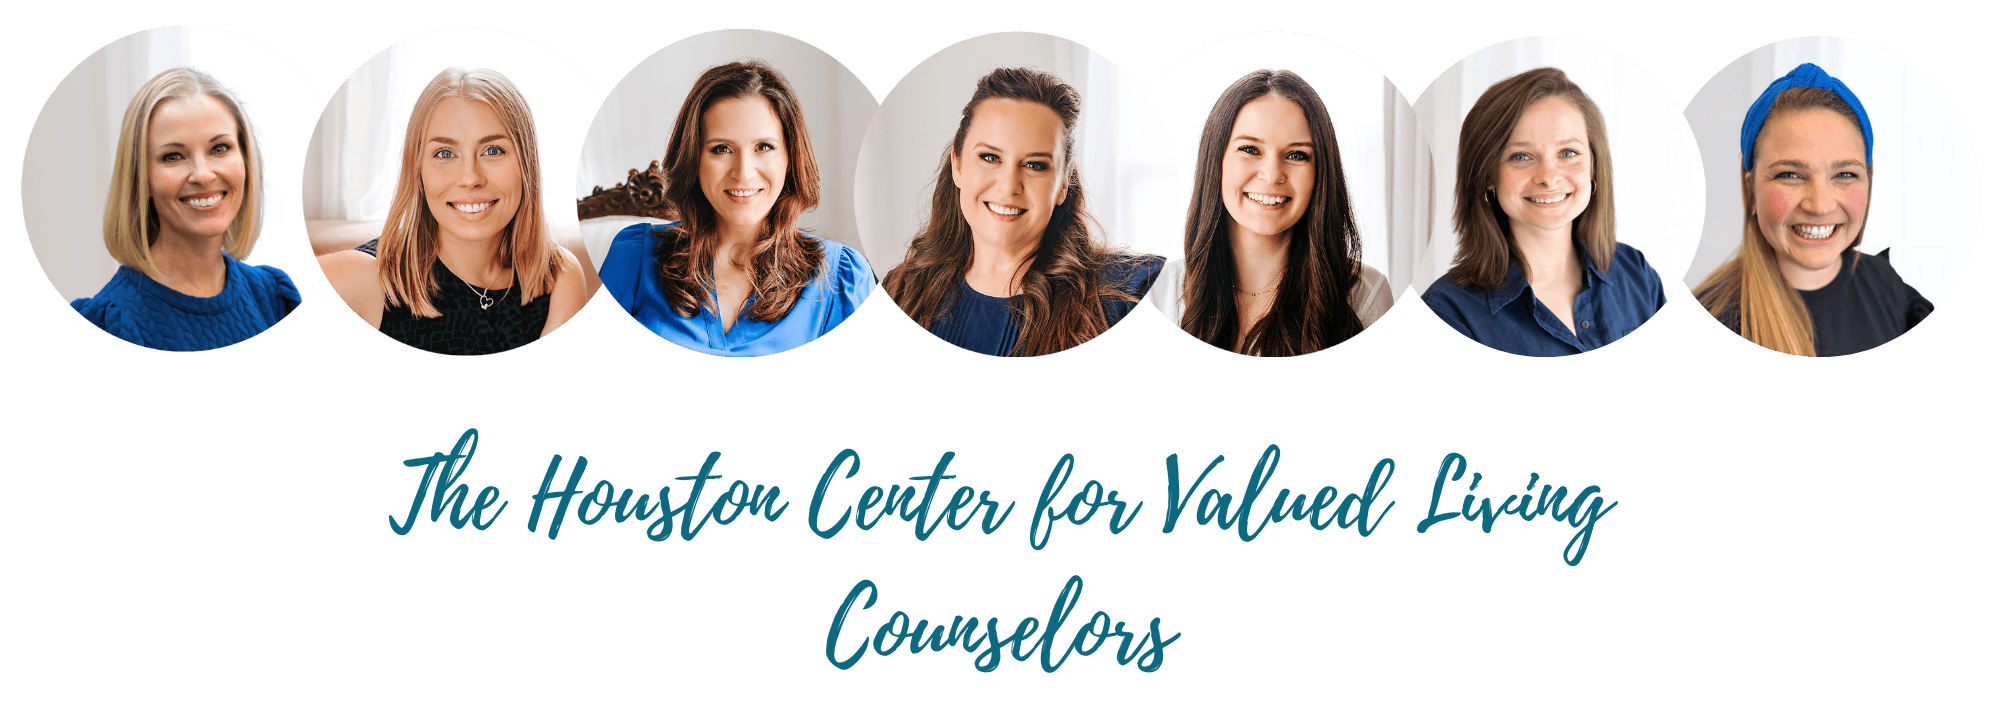 Houston Center for Valued Living Therapists